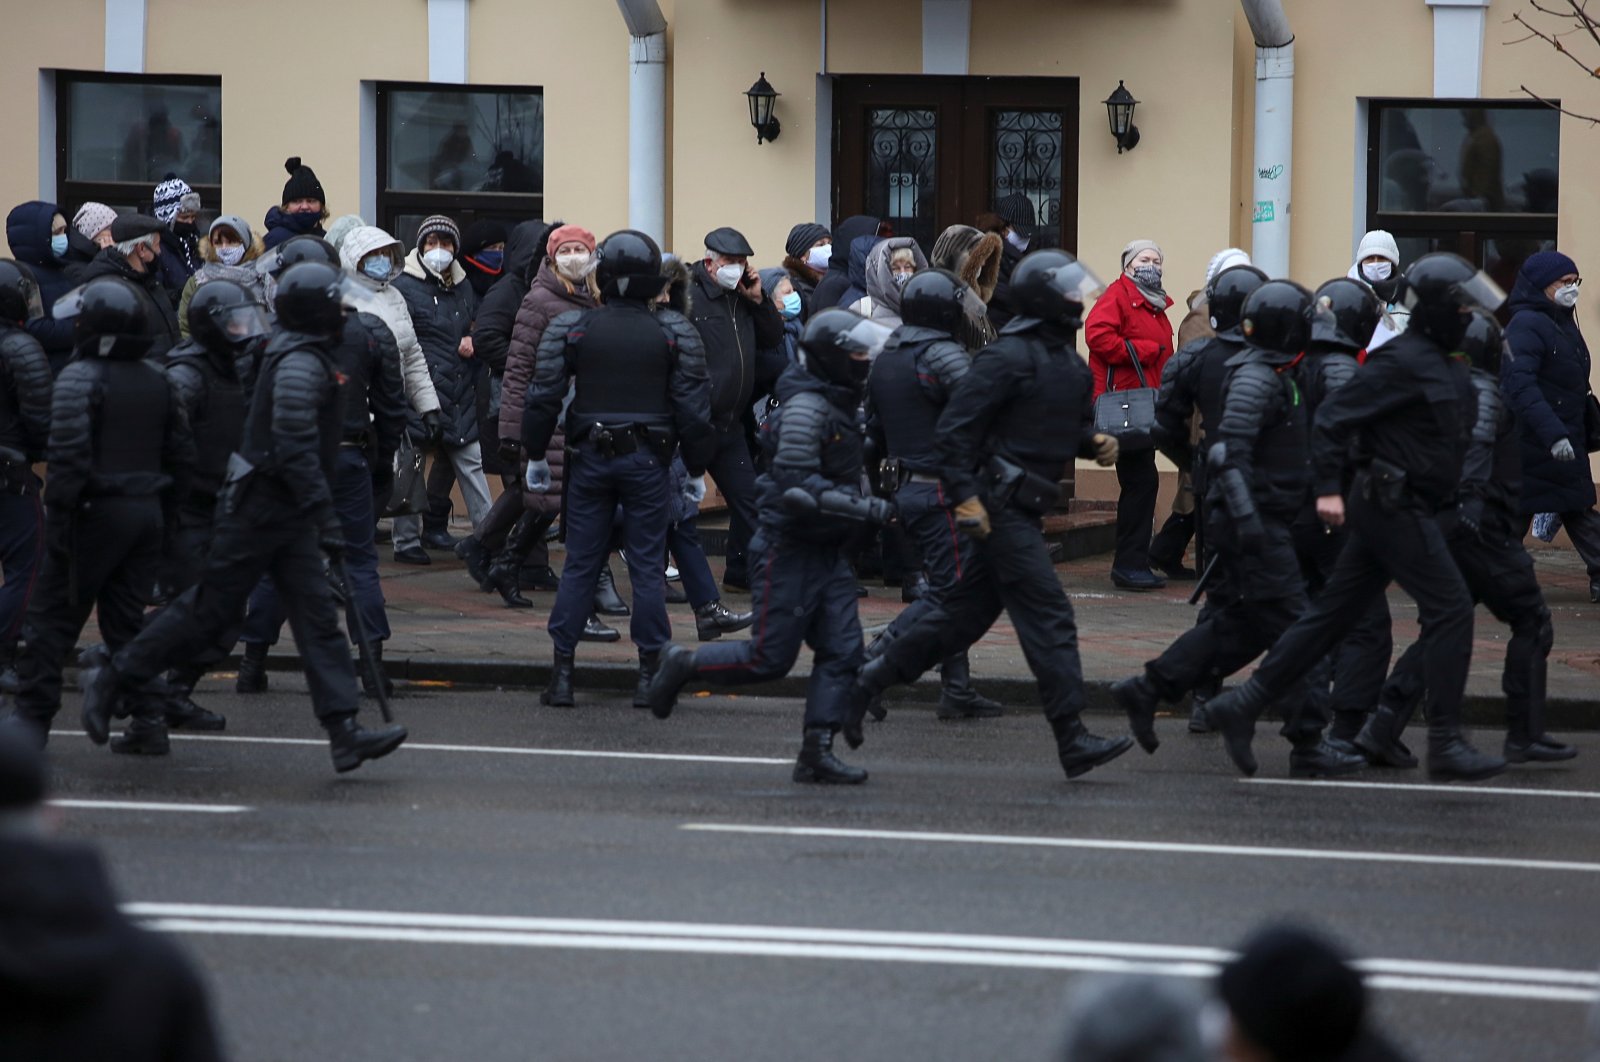 Belarusian law enforcement officers follow participants of an opposition rally, who demand the resignation of Belarusian President Alexander Lukashenko and protest against police violence, Minsk, Belarus, Nov. 30, 2020. (Reuters Photo)